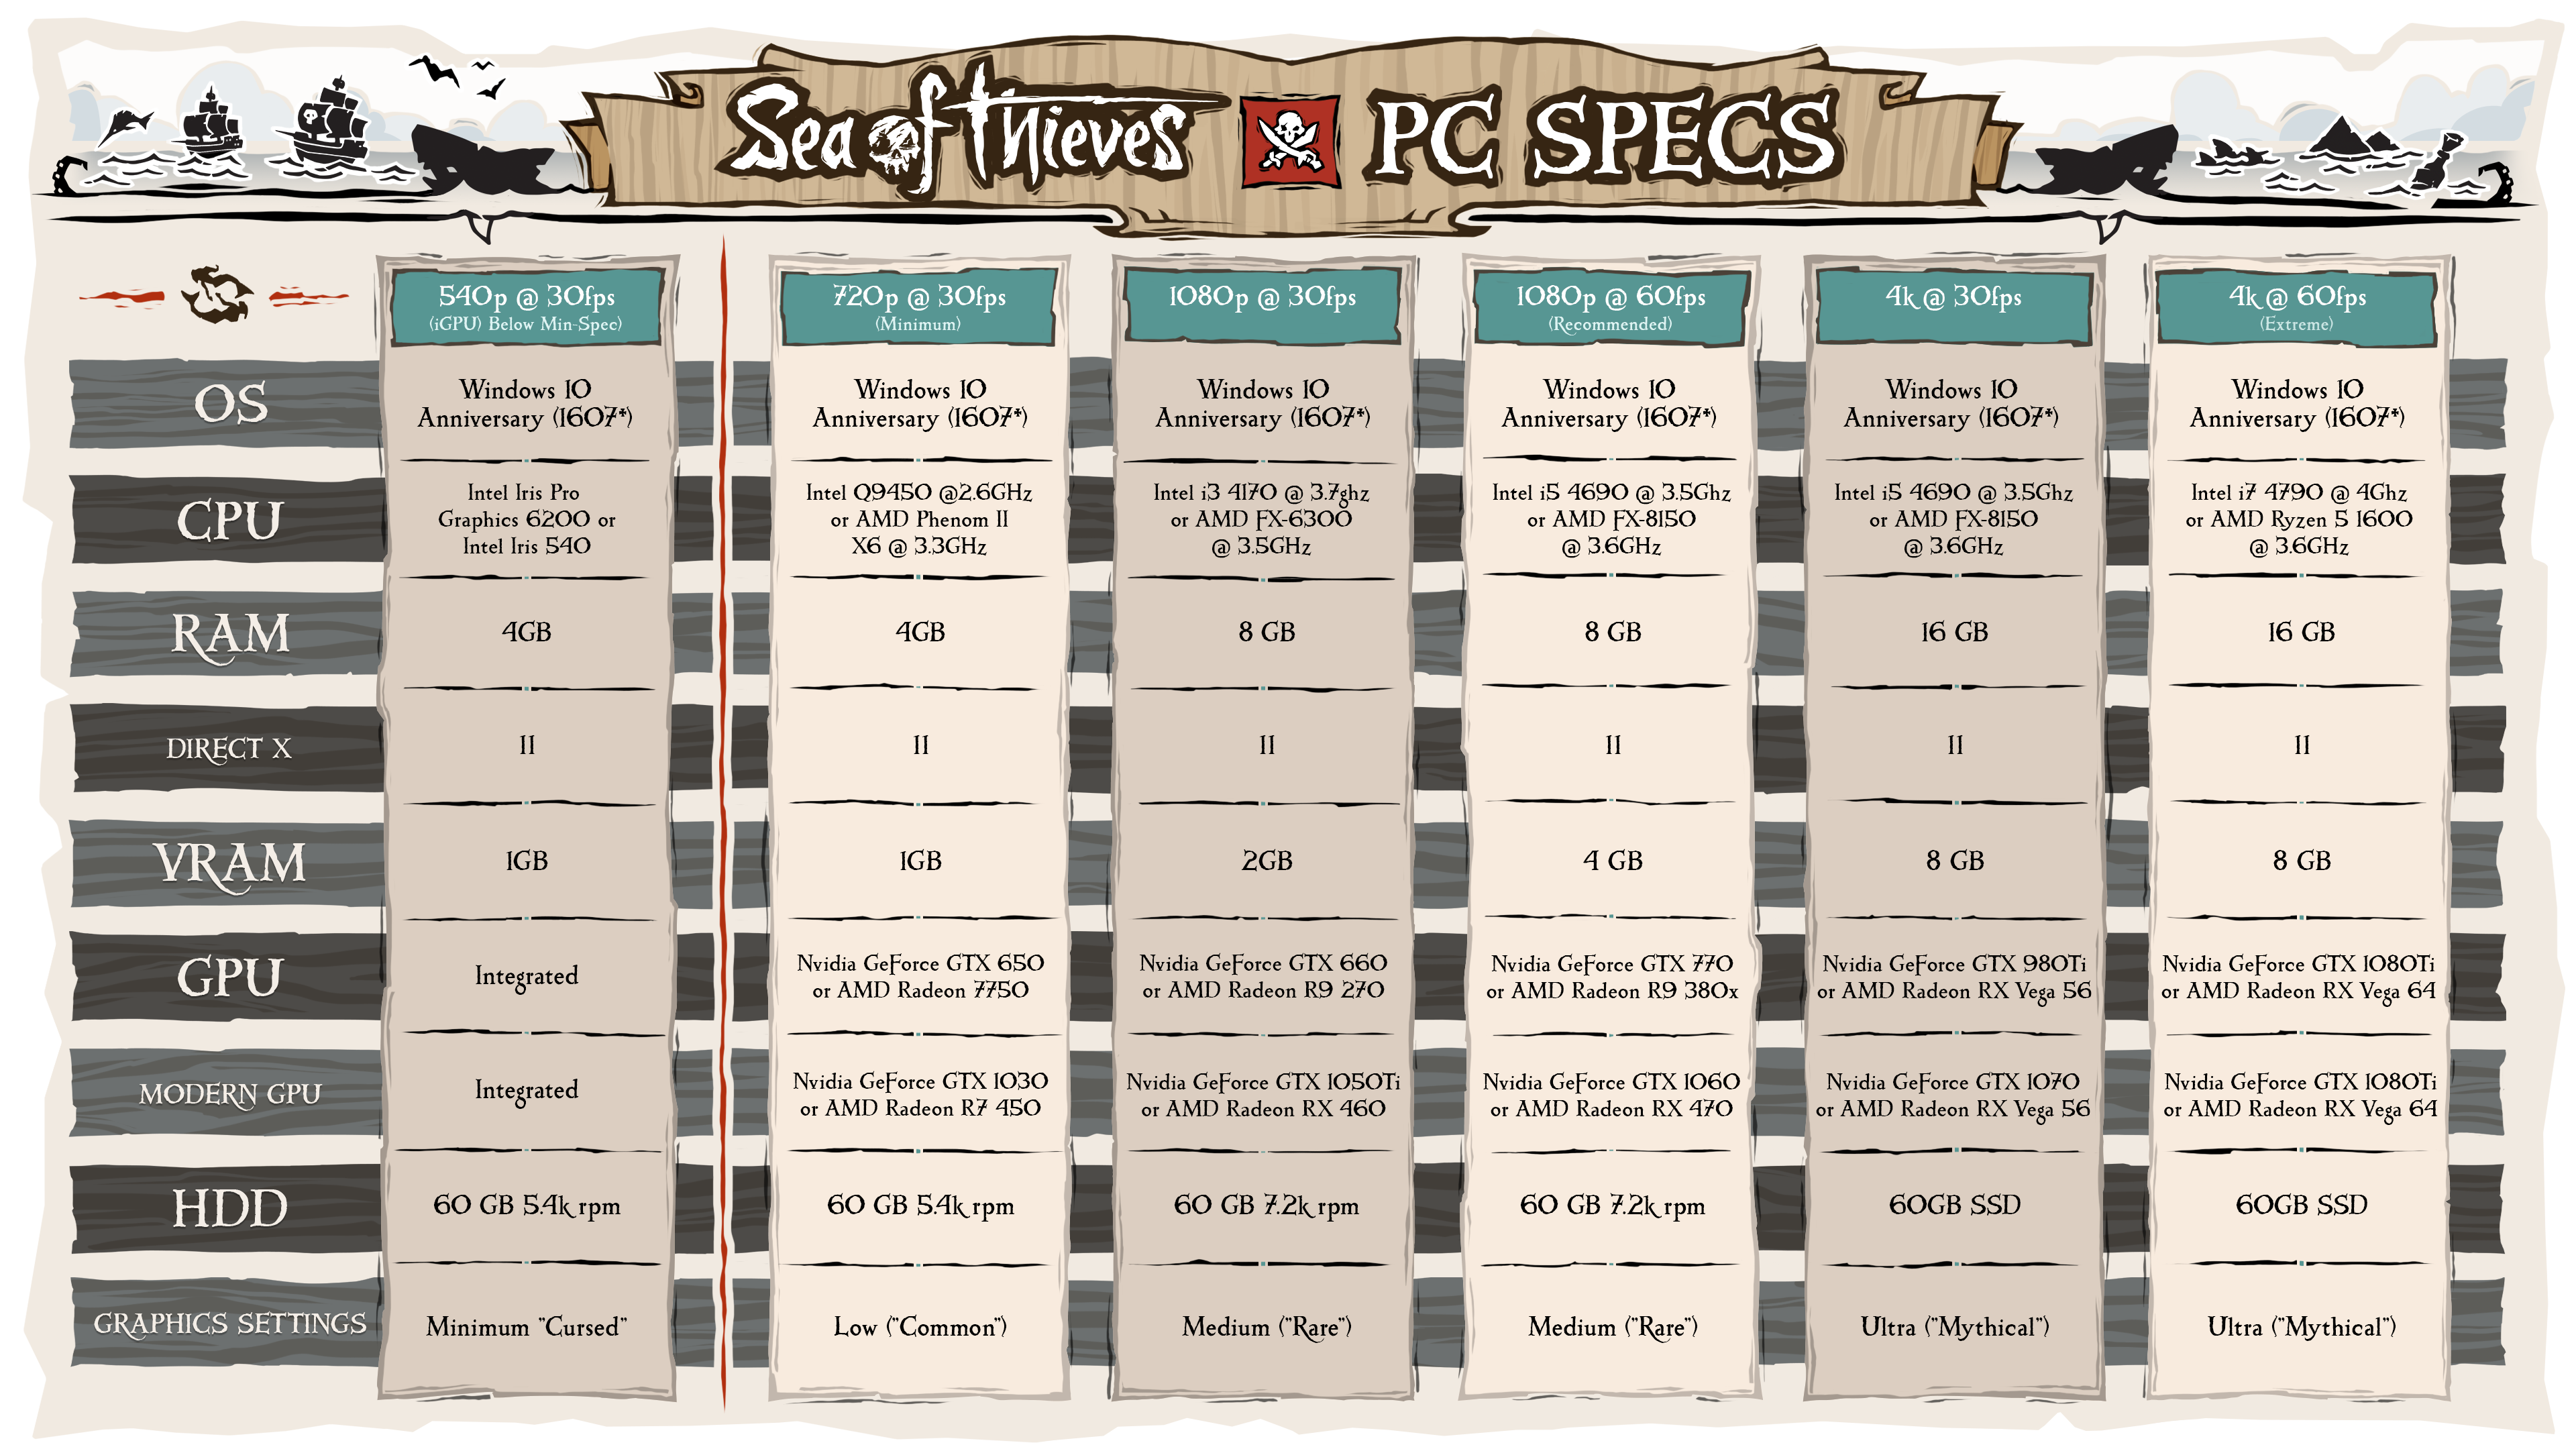 When buy sea of thieves pc do i need gamepass